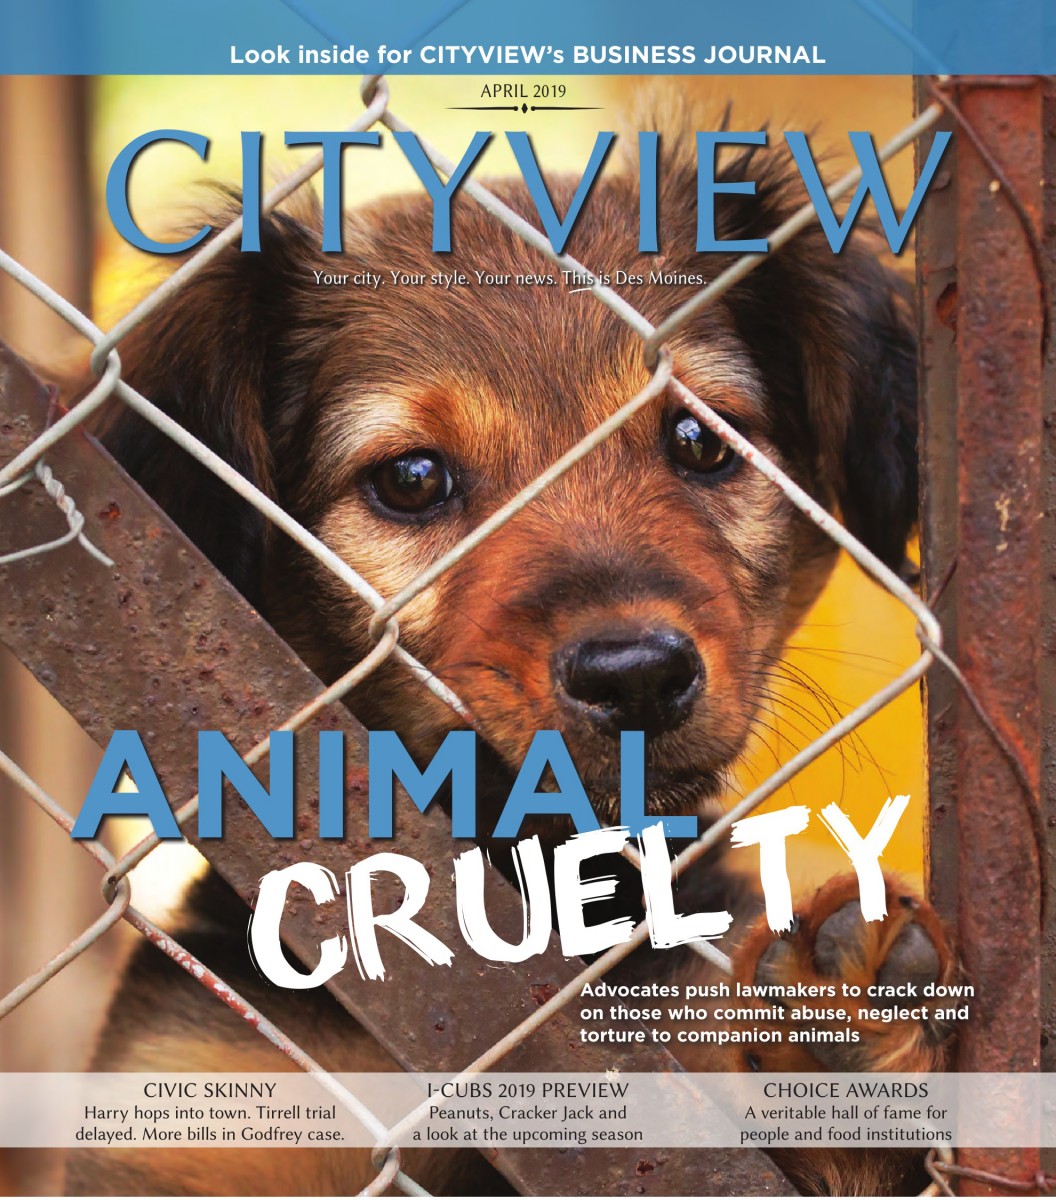 http://www.dmcityview.com/CityviewApril2019/files/pages/tablet/1.jpg